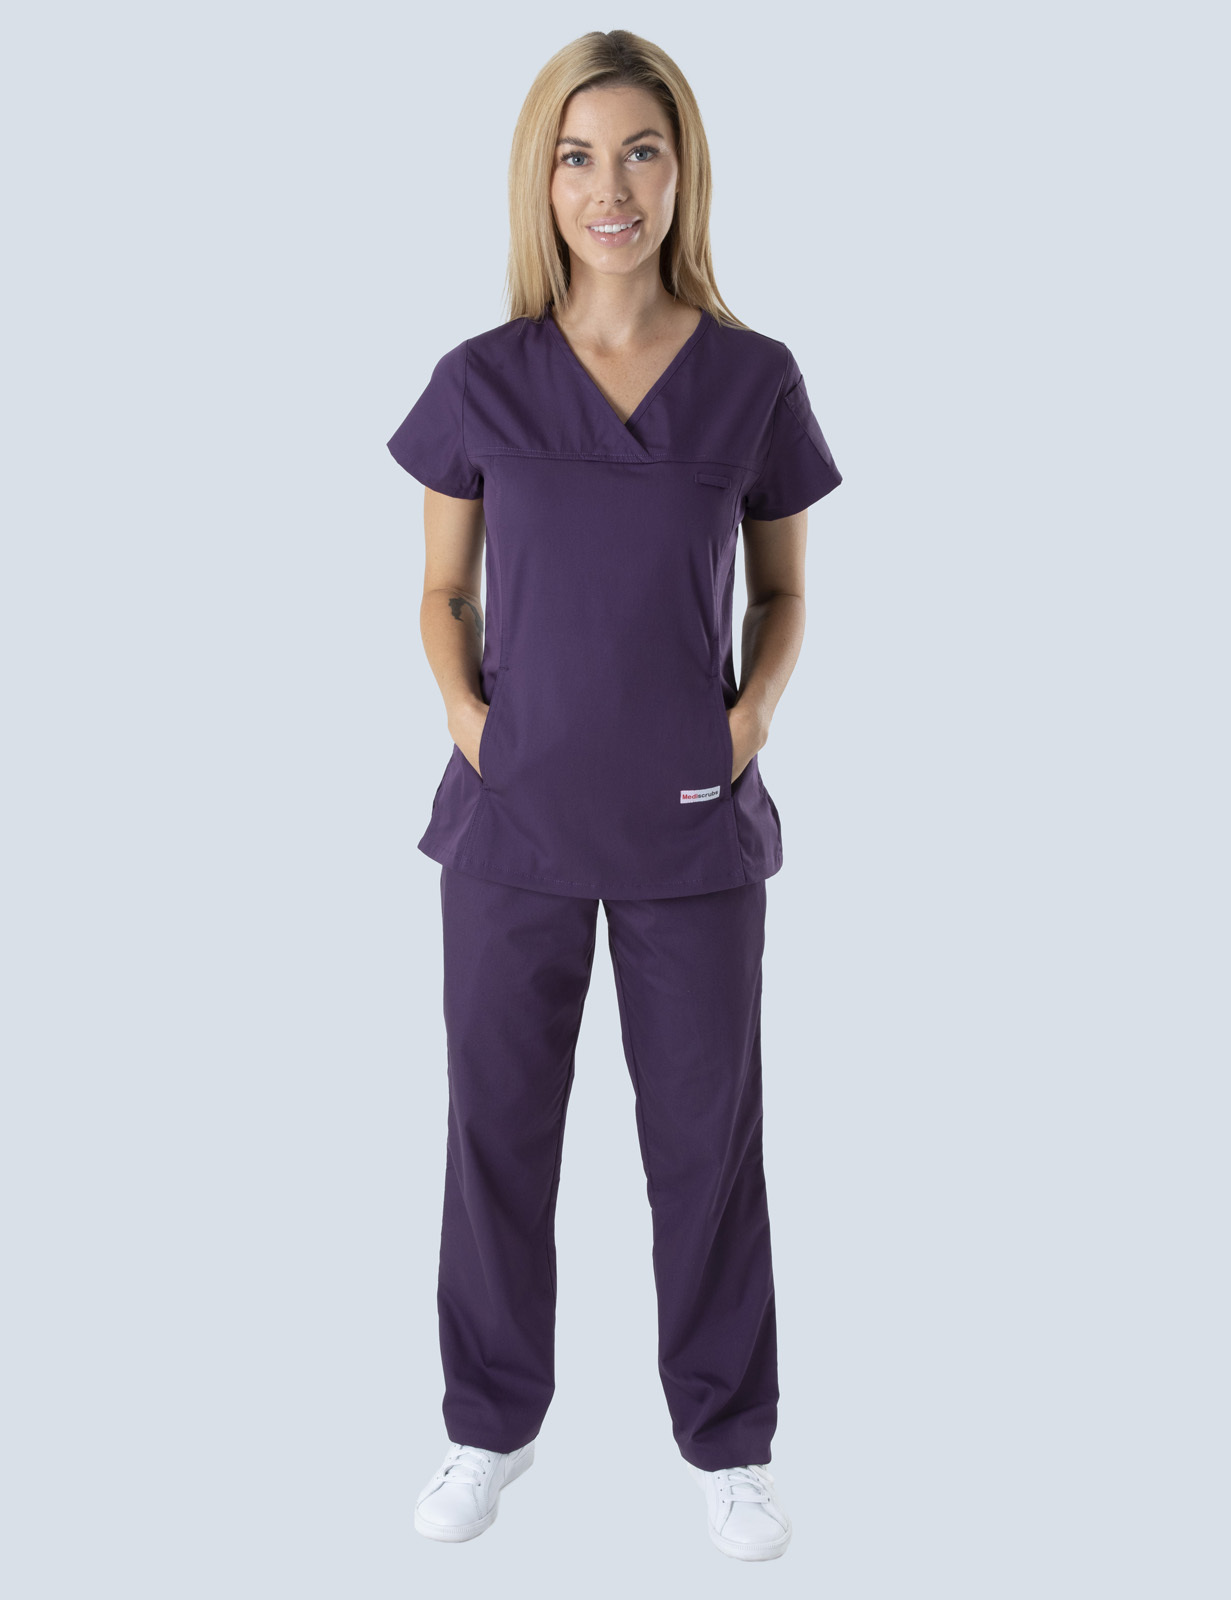 Children's Hospital Melbourne - ED (Women's Fit Solid Scrub Top and Cargo Pants in Aubergine incl Logos)